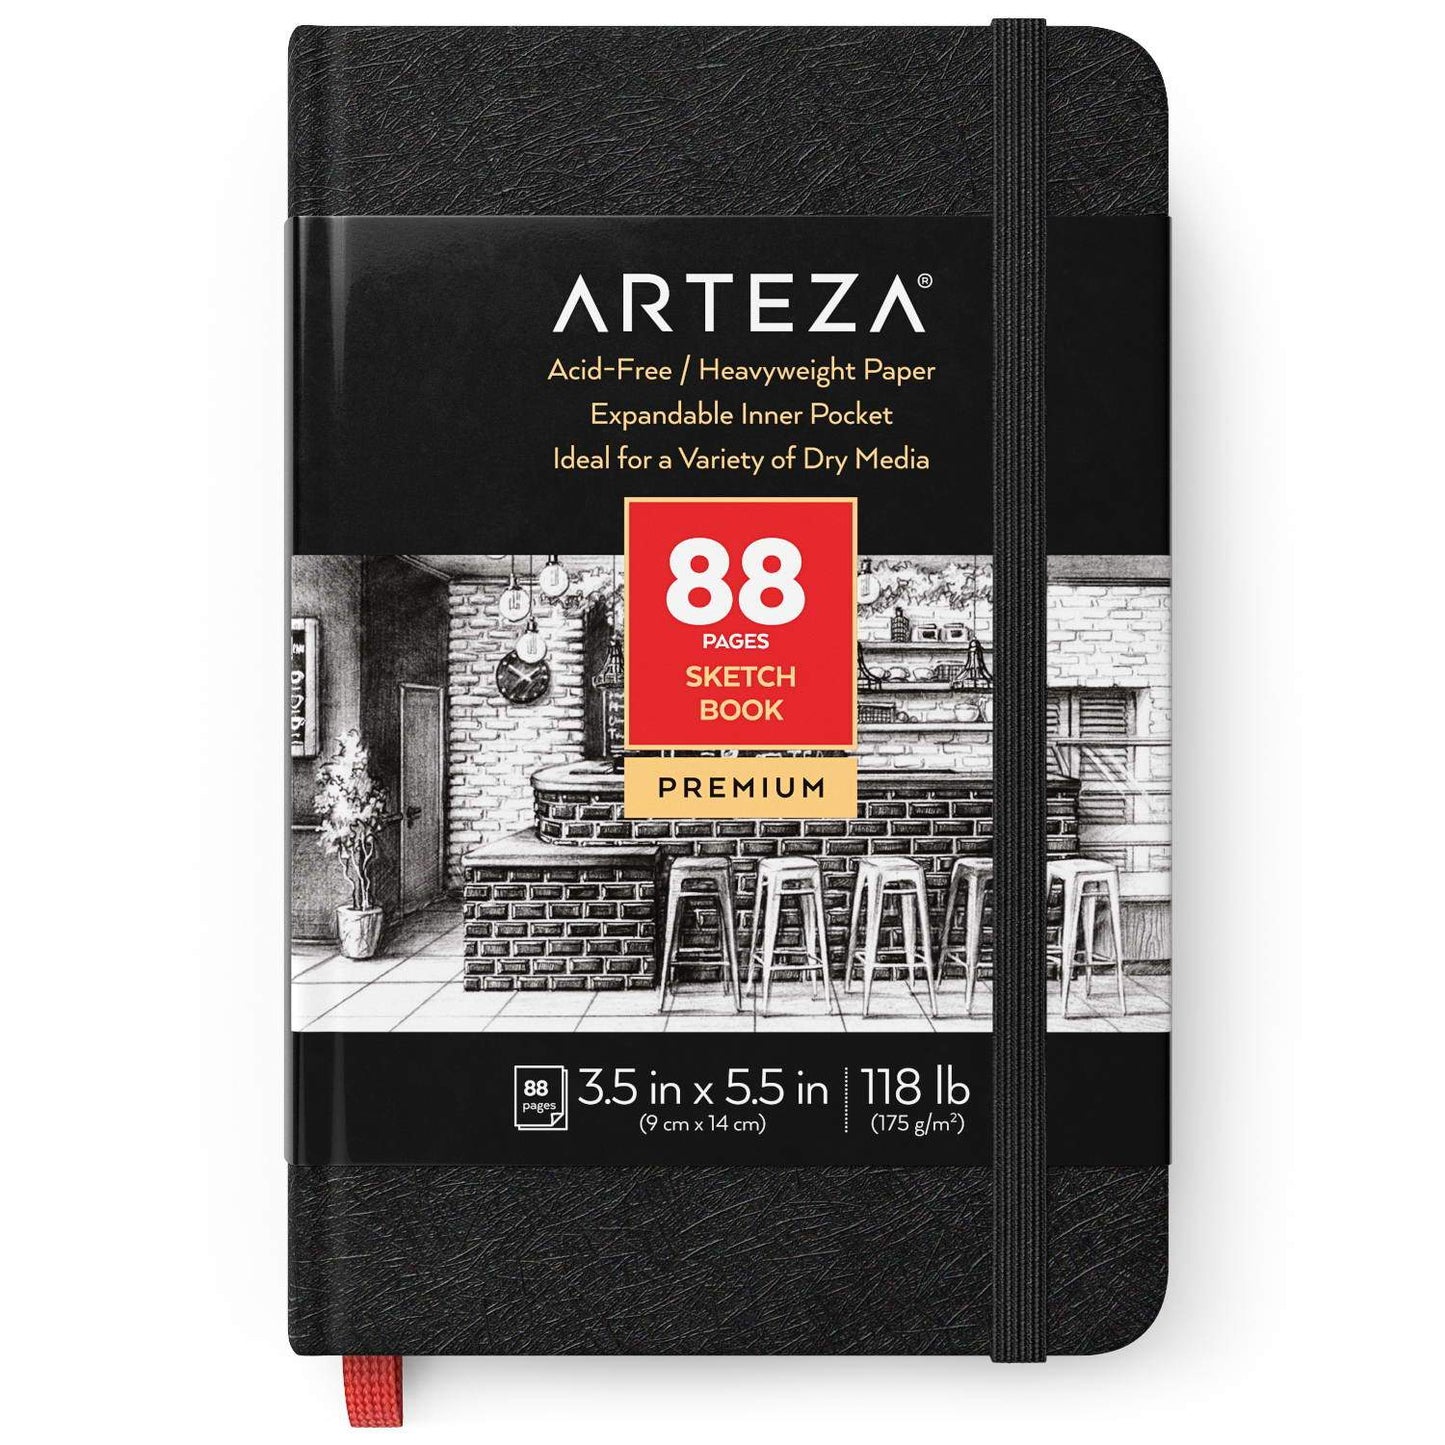 Buy Arteza Watercolor Sketchbook, Pack of 3, 5.5 x 8.5 Inches, 32